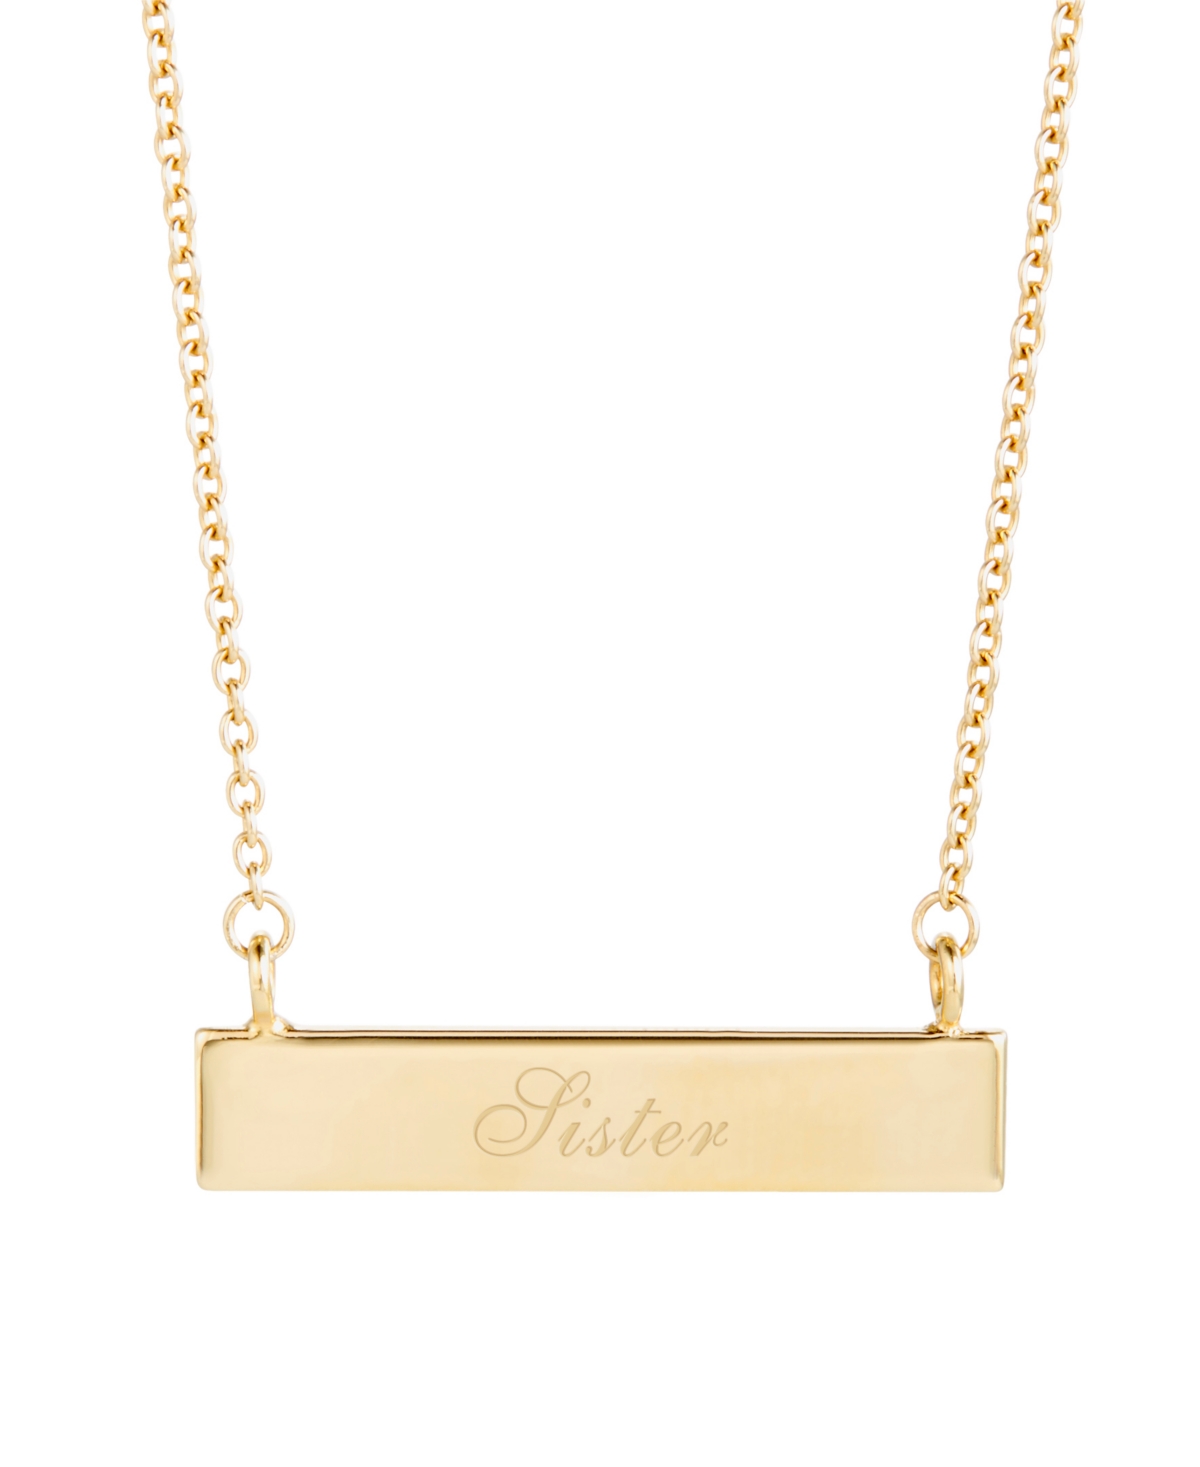 14K Gold Plated Sister Bar Necklace - Gold-Plated